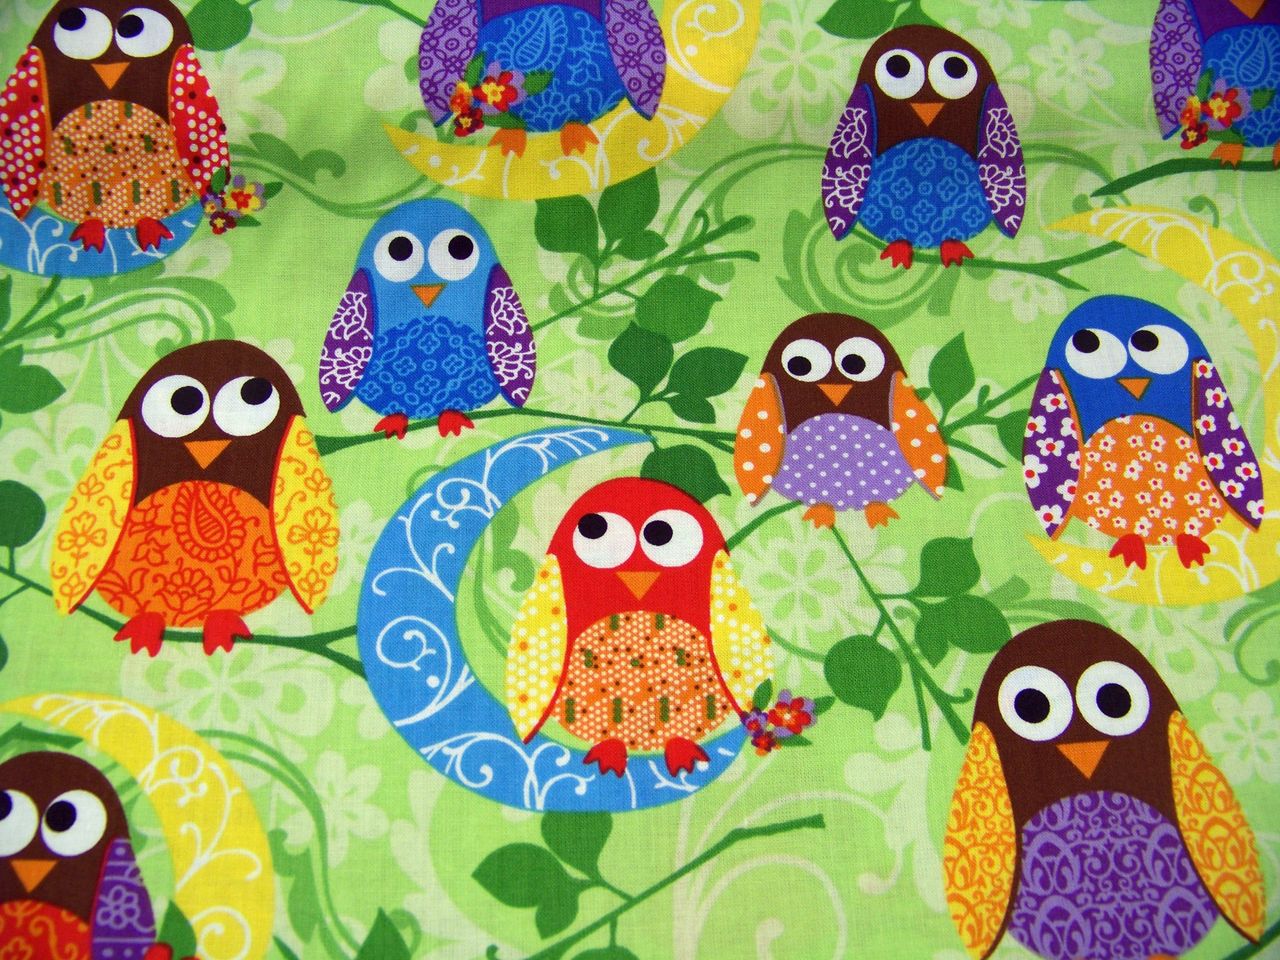 Was Also Looking For Fabric And Found The Cute Owl It Is